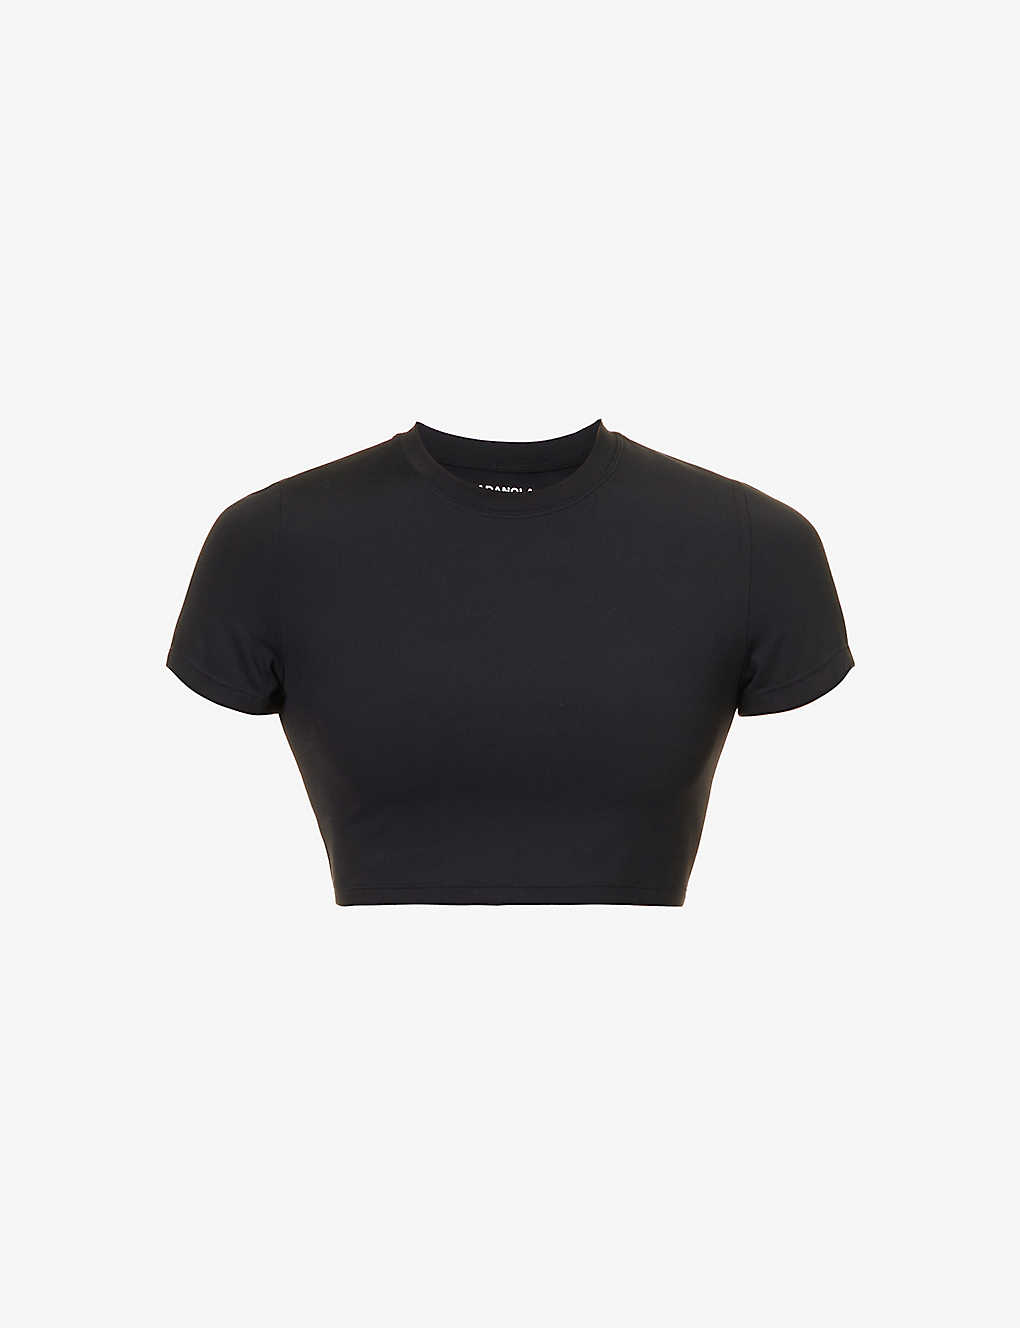 Adanola Womens Black Fitted Cropped Stretch-woven T-shirt